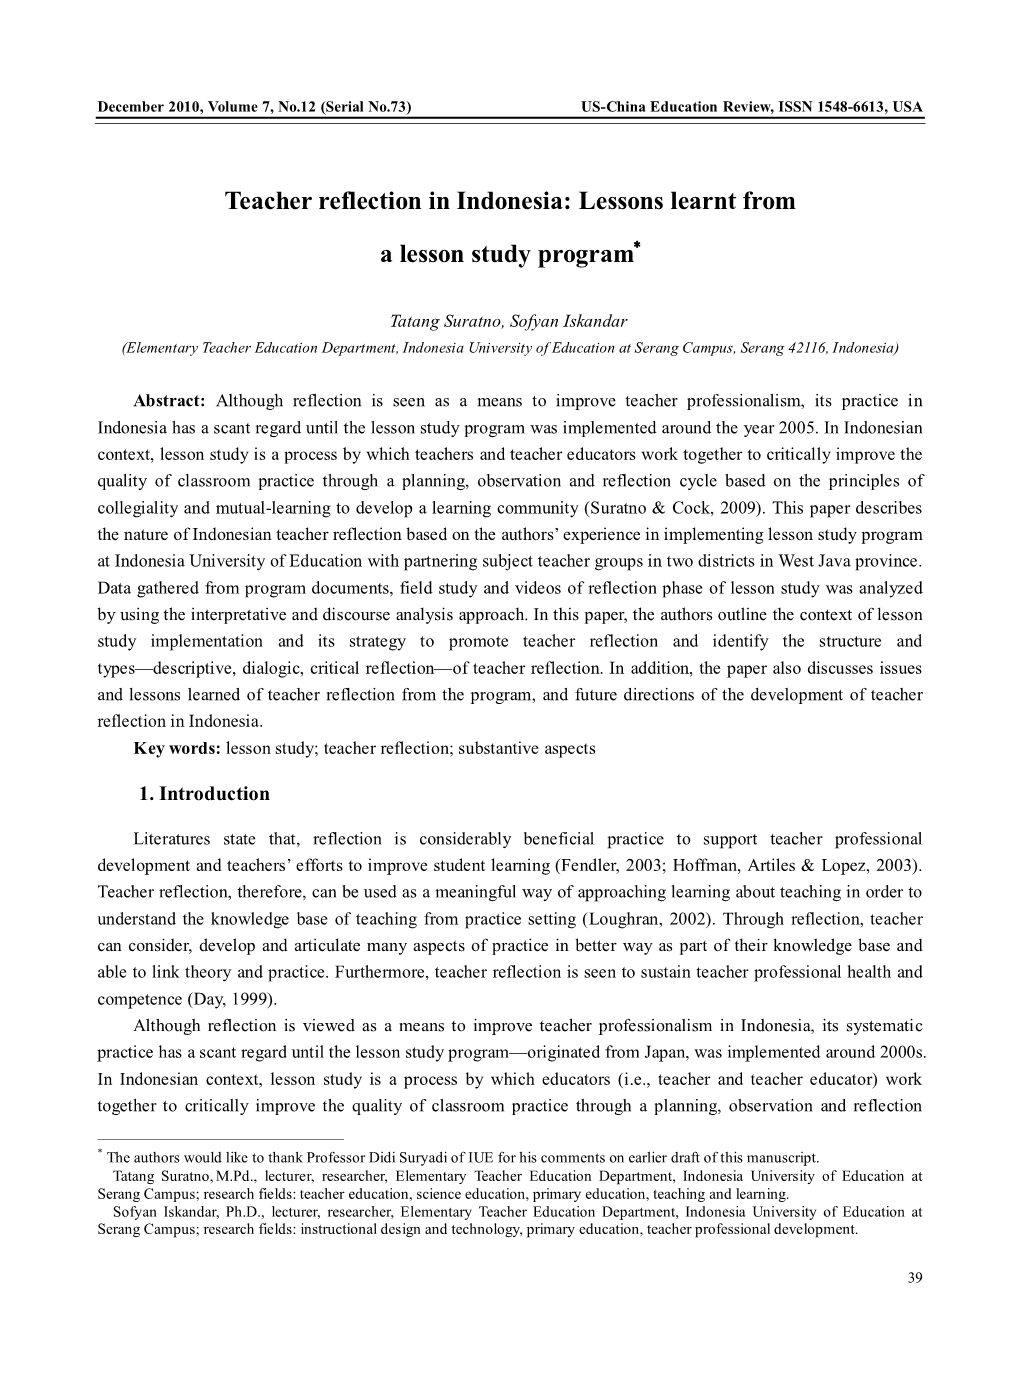 Teacher Reflection in Indonesia: Lessons Learnt from a Lesson Study Program Cycle (Suratno & Cock, 2009)